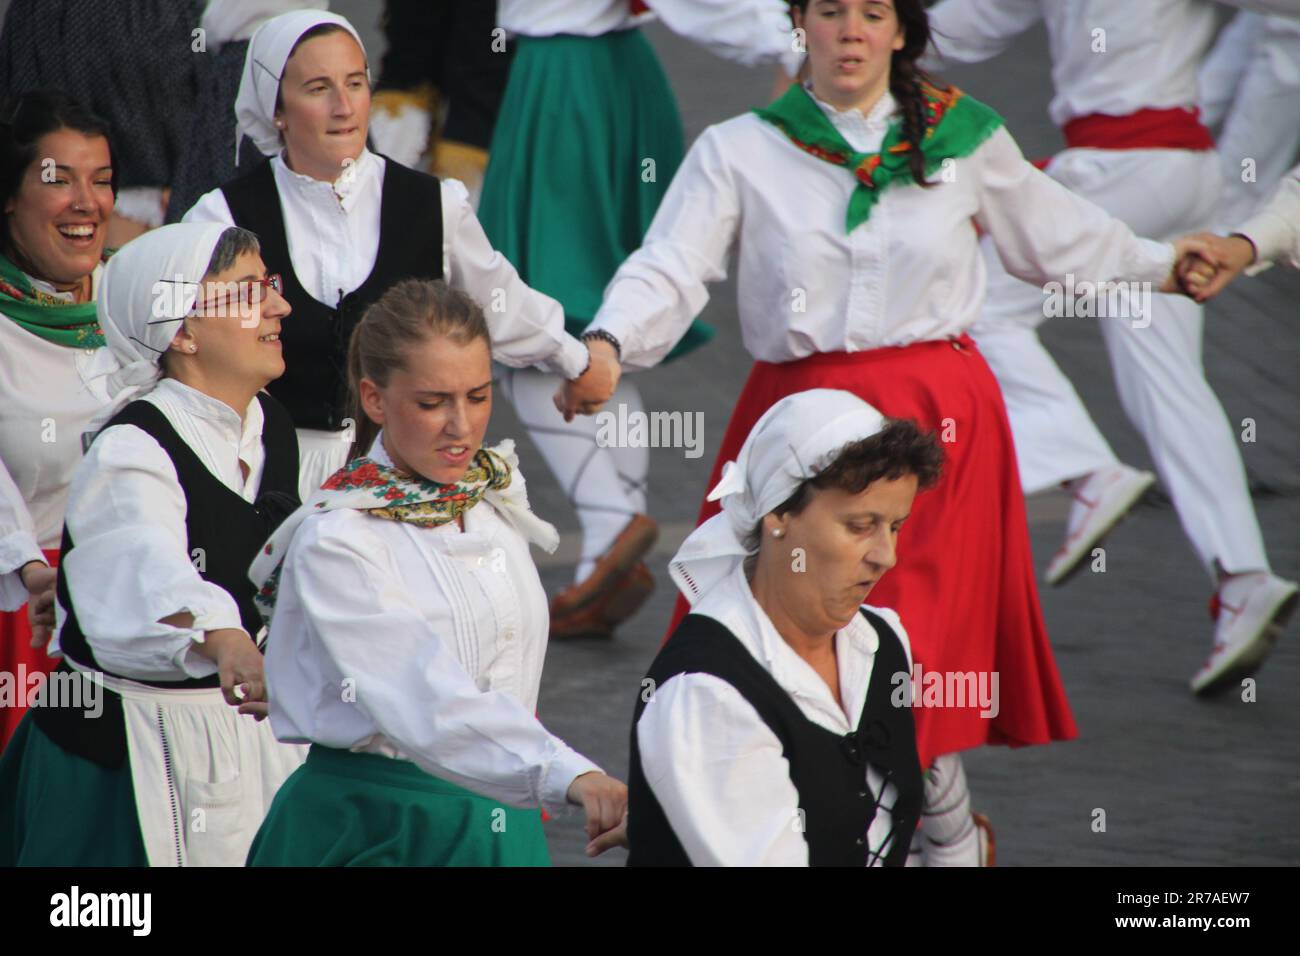 A group of female friends dressed in traditional period-style costumes are joyfully dancing in the street together Stock Photo